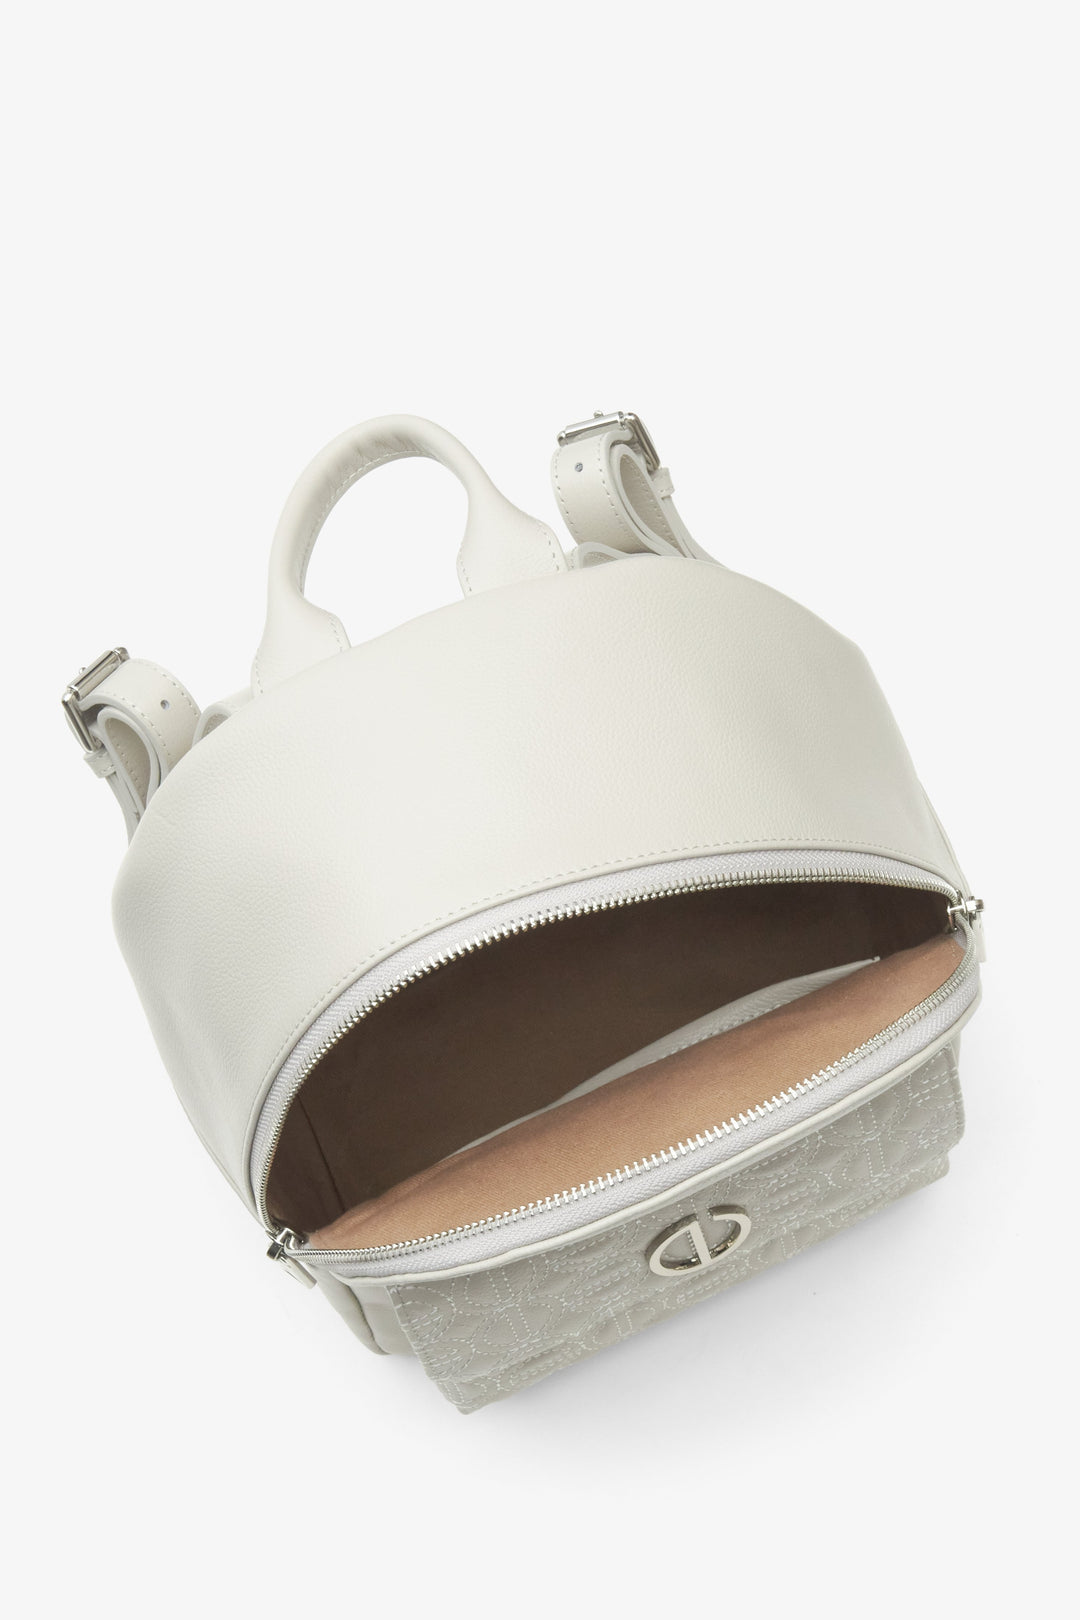 Light grey leather Estro backpack - close-up on the interior of the model